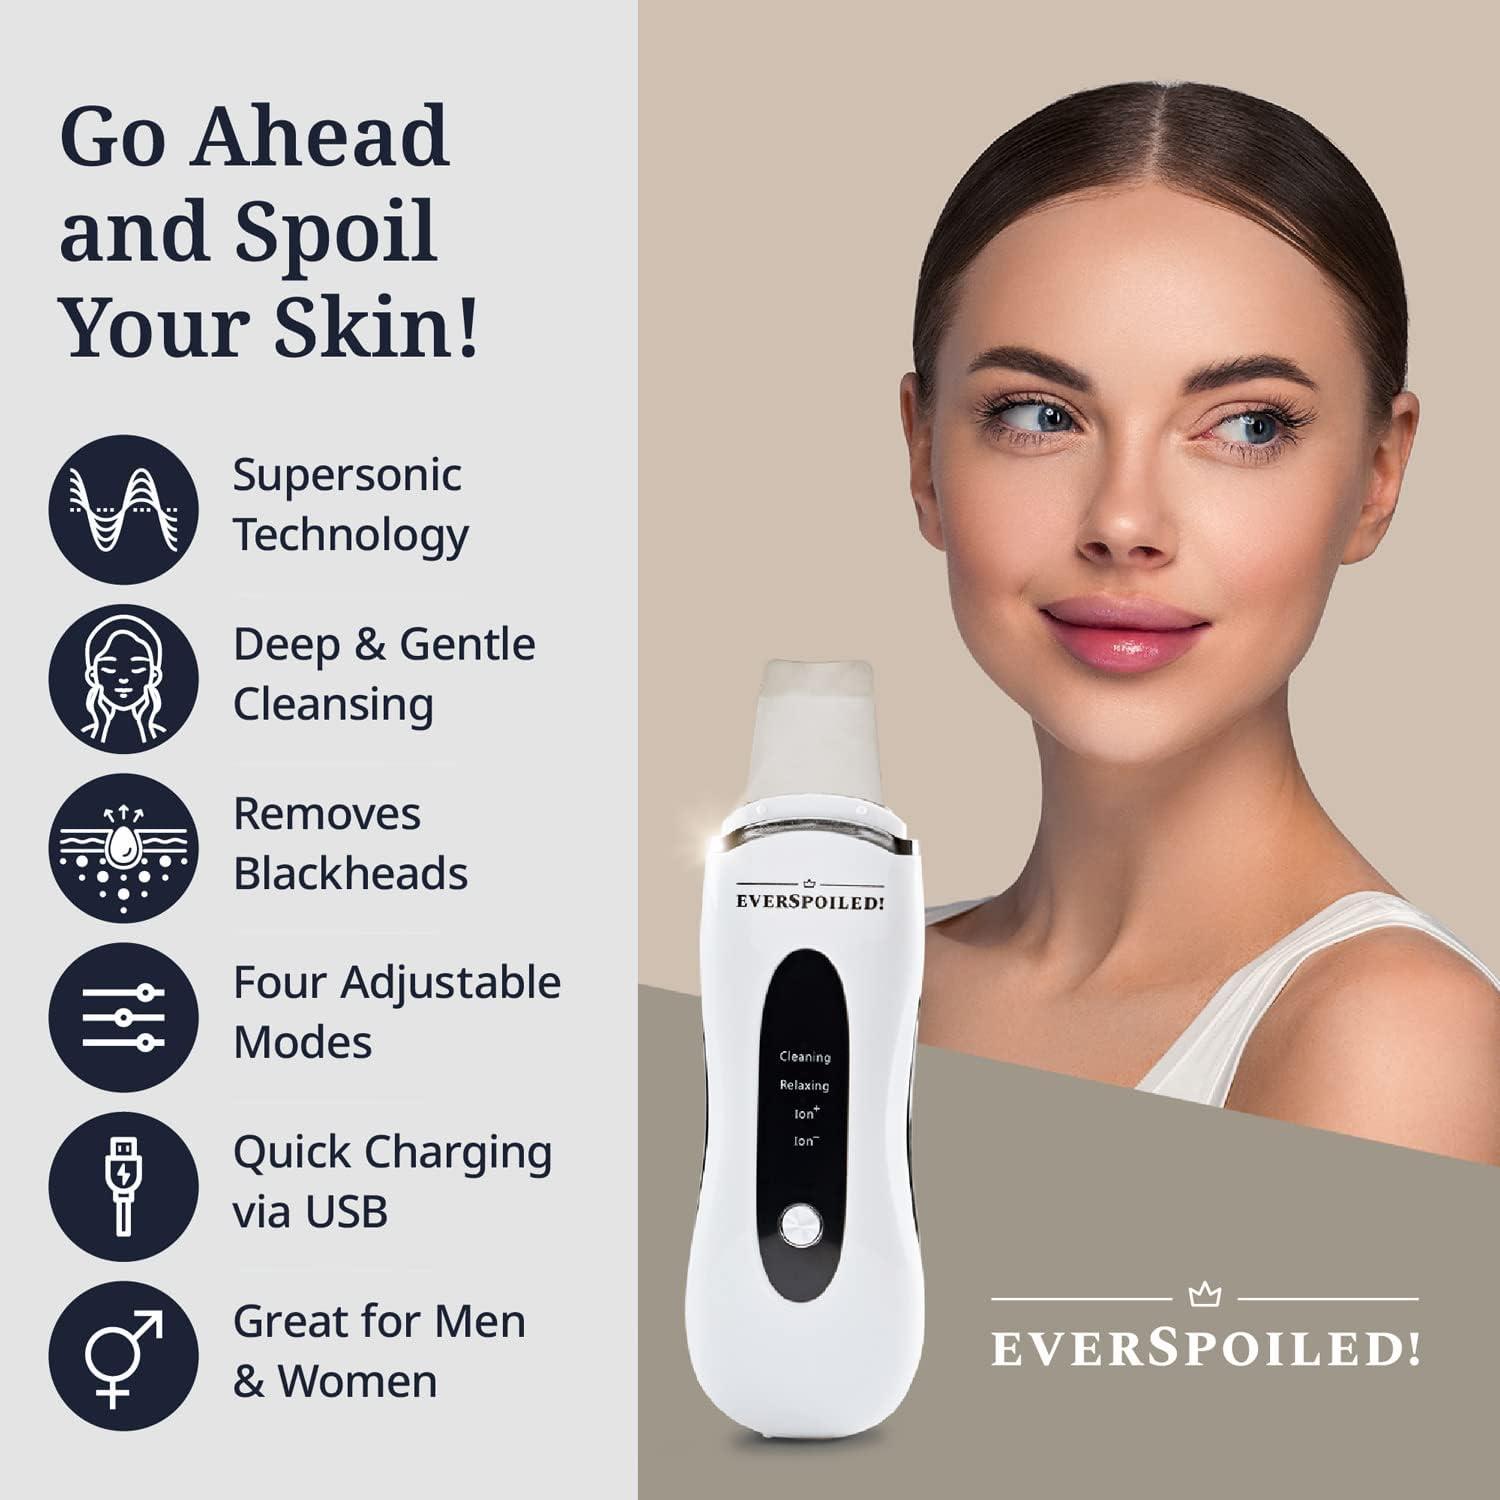 How to Effectively Use 3-in-1 Ultrasonic Skin Scrubber